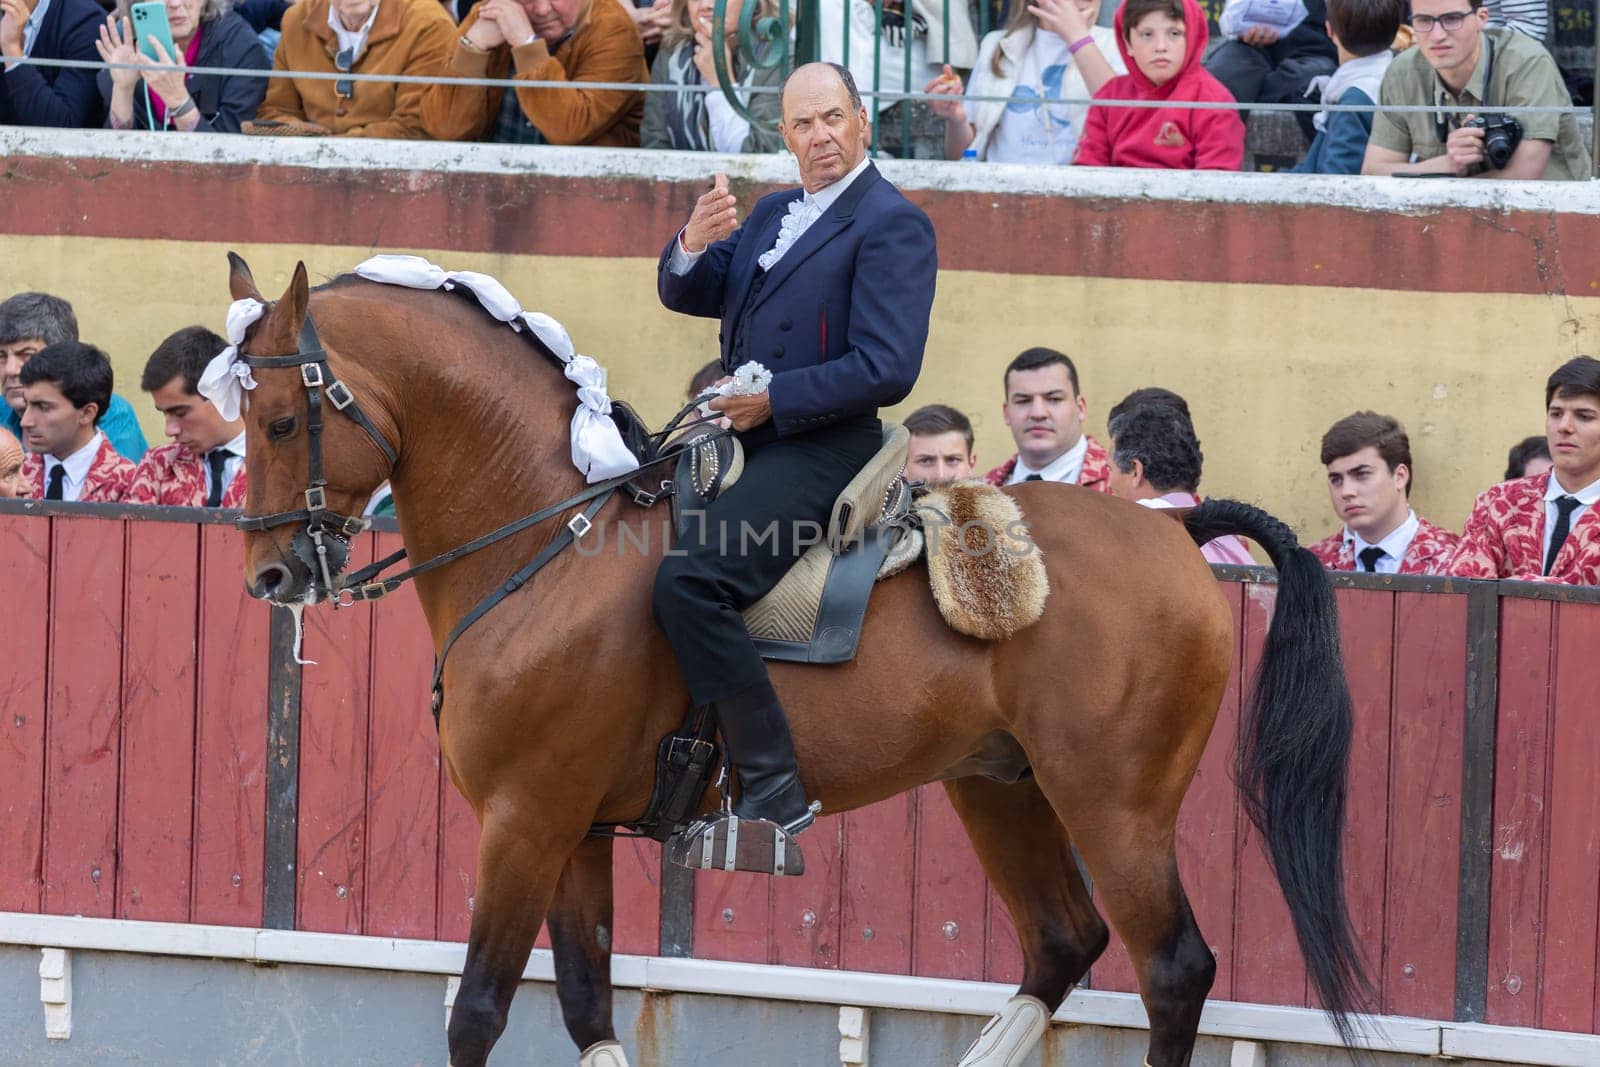 March 26, 2023 Lisbon, Portugal: Tourada - man in suit cavaleiro on a horseback on arena of amphitheater by Studia72